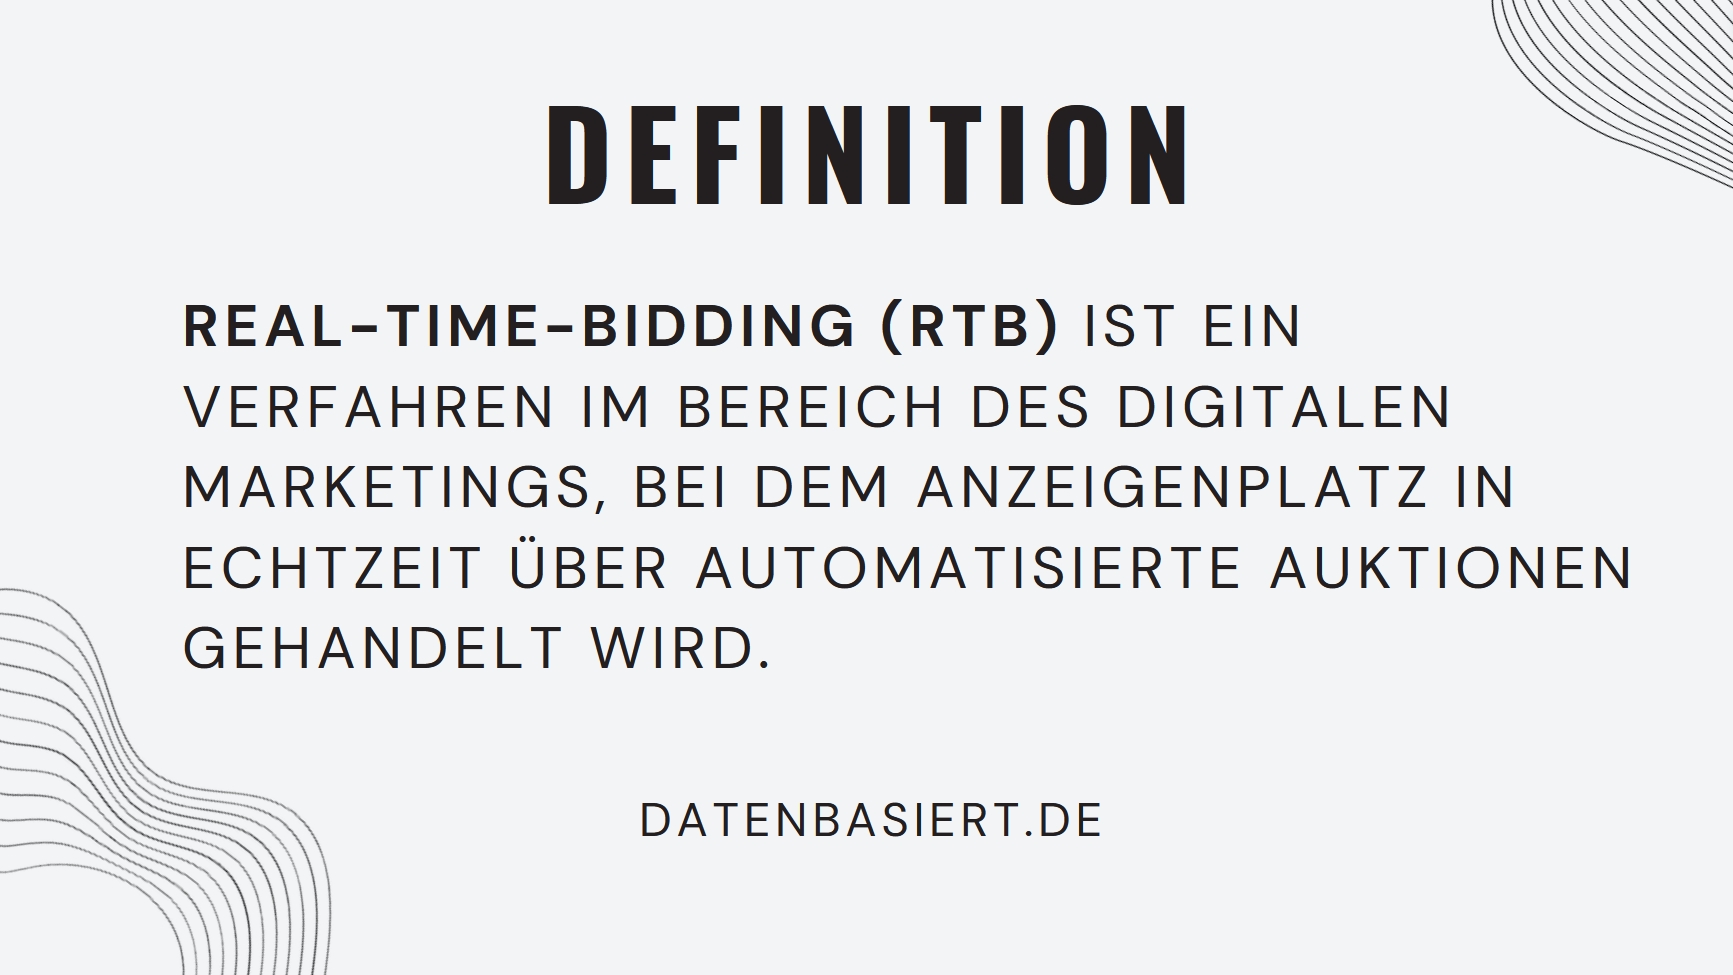 Real-Time-Bidding - Definition RTB Marketing